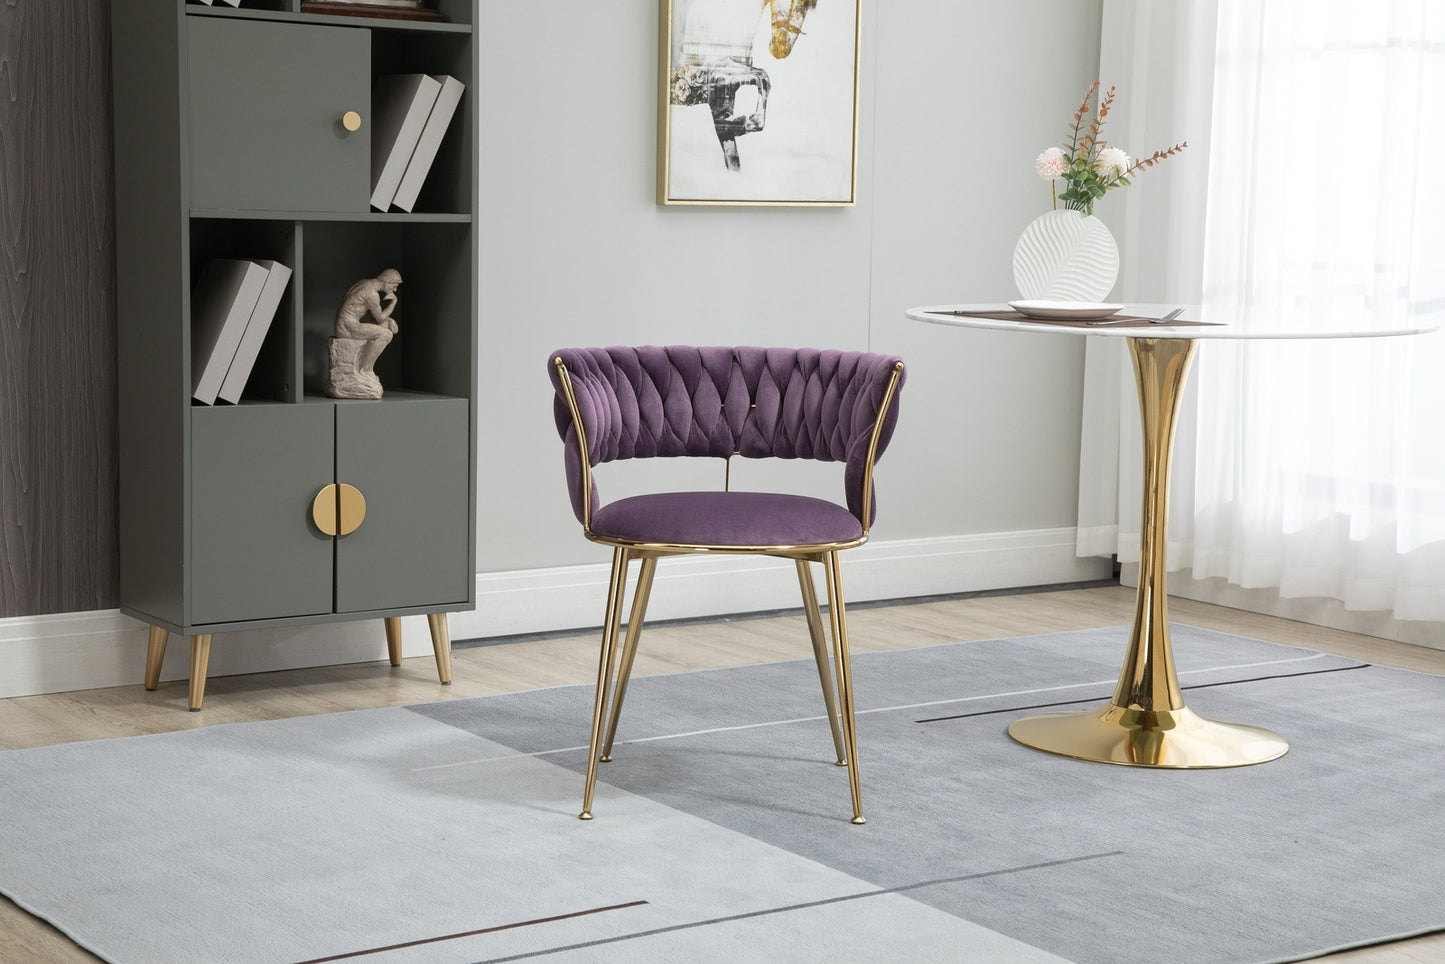 Coolmore Contemporary Velvet Dining Chairs with Gold Legs Set of 2